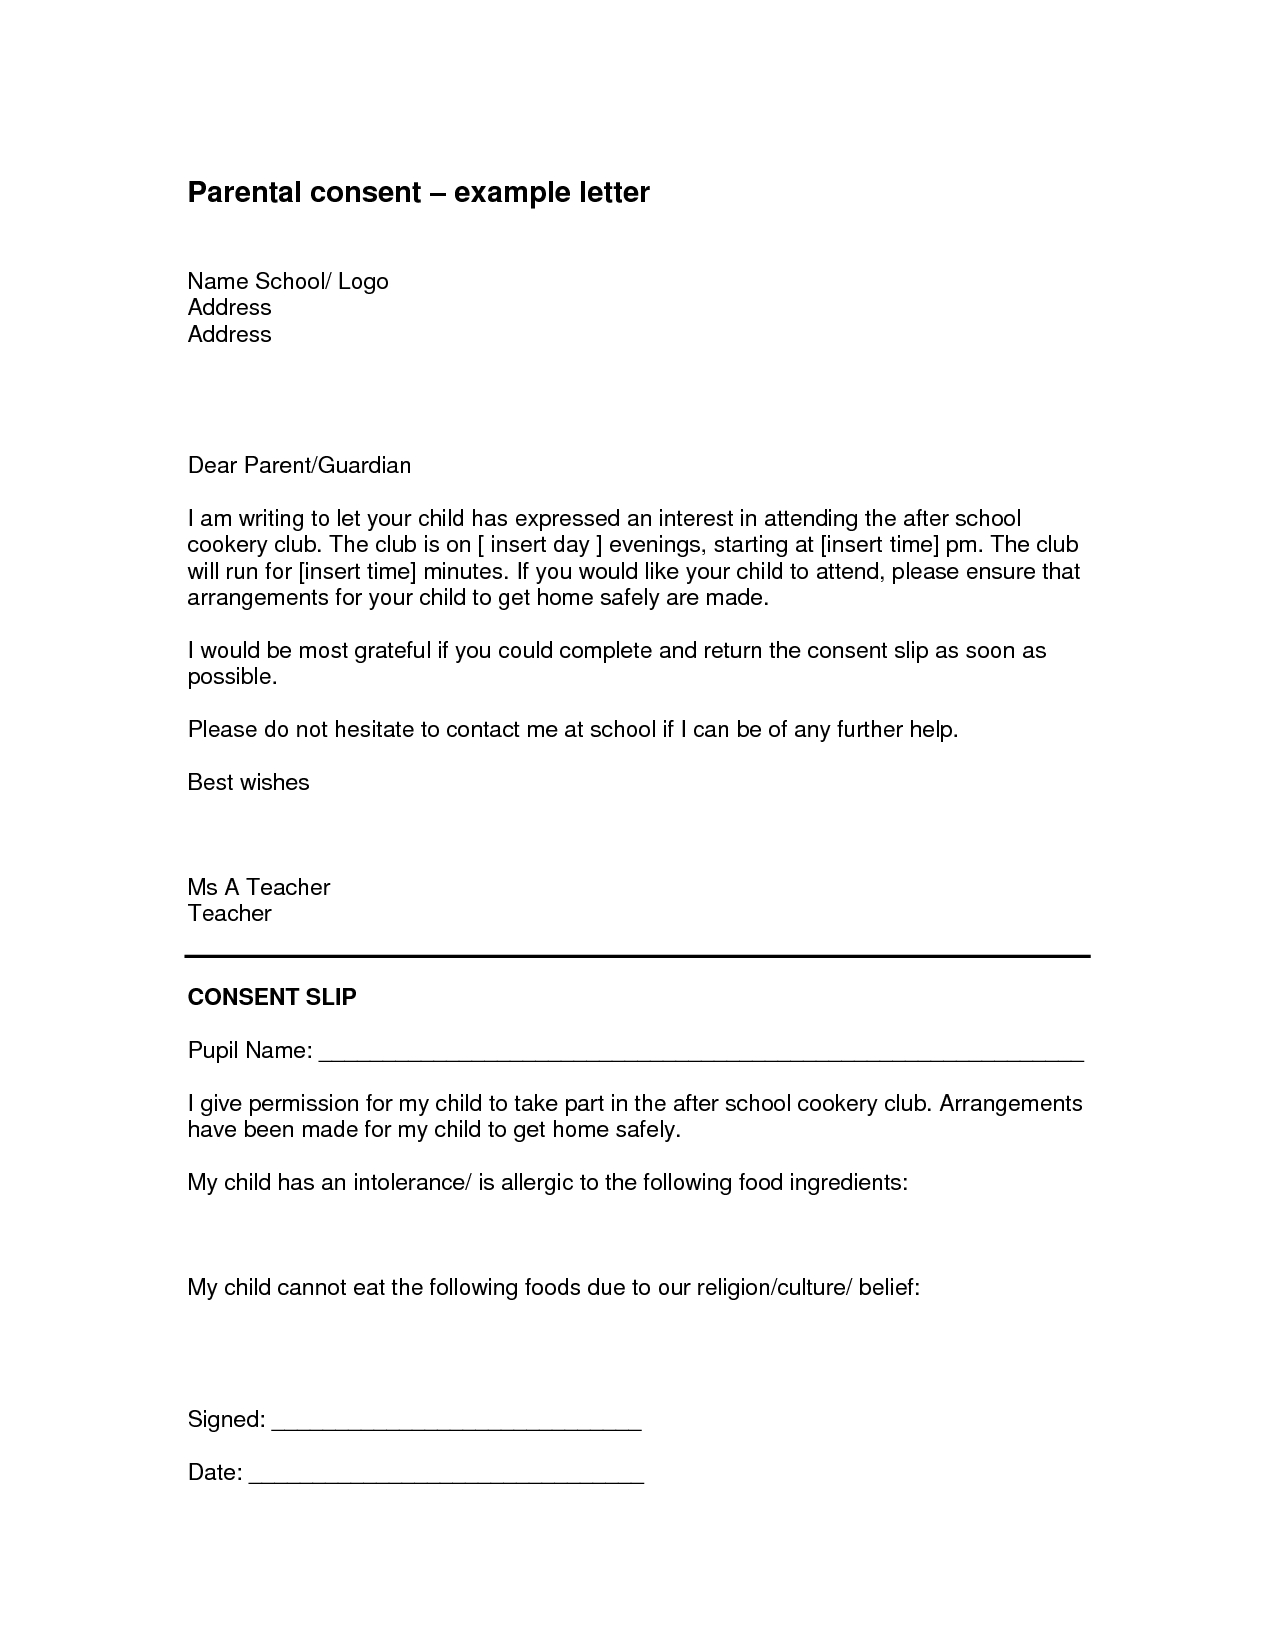 child-care-authorization-letter-template-examples-letter-template